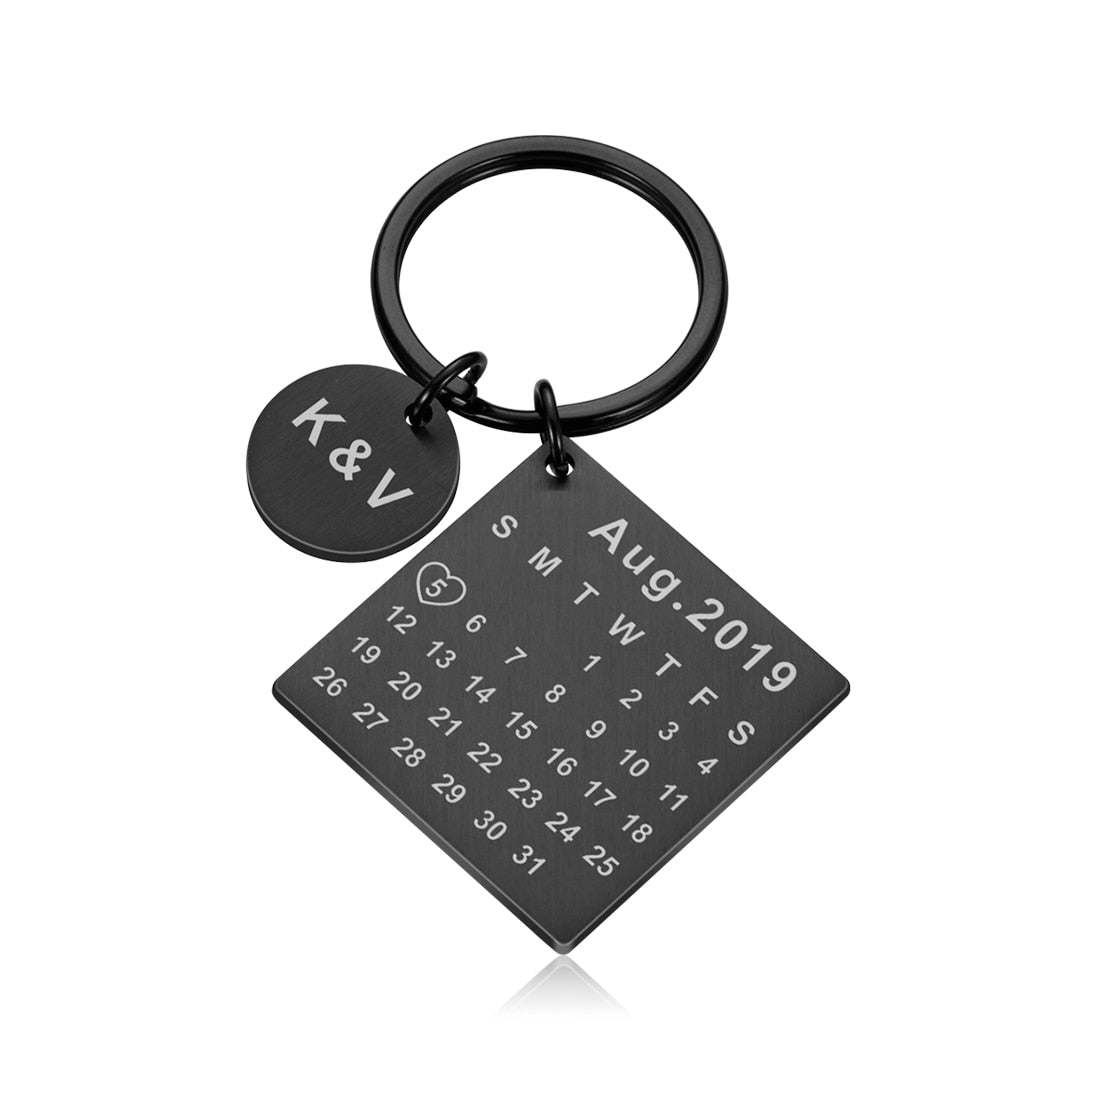 Personalized Calendar Date Key Chain - Engraved Stainless Steel, Wedding Anniversary